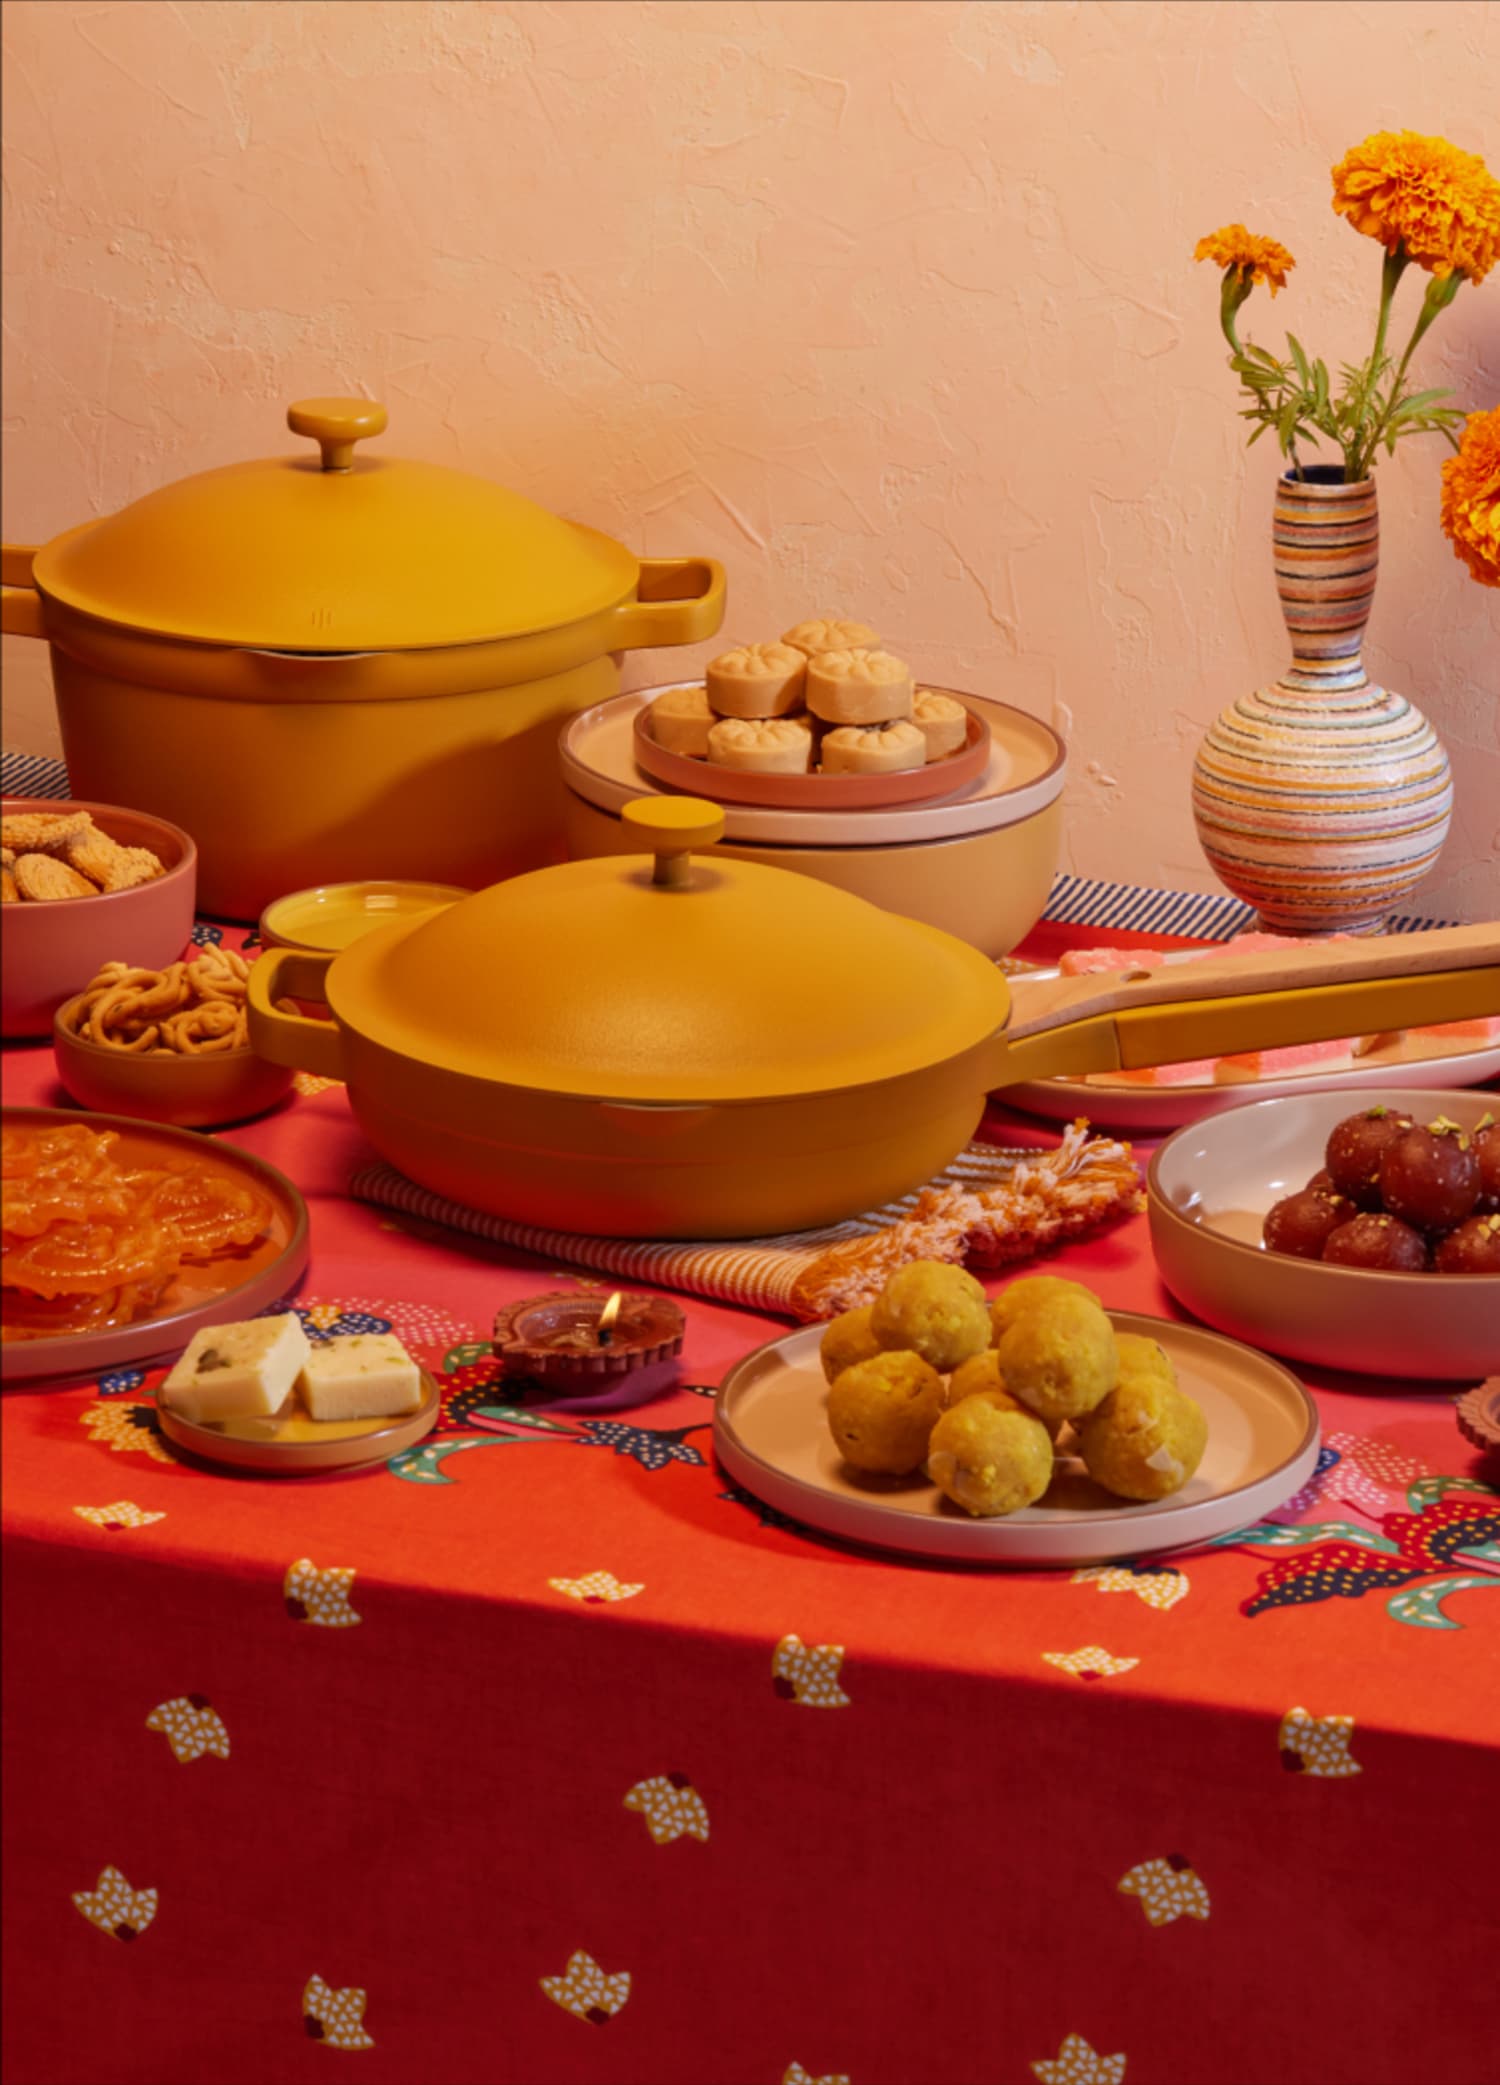 Our Place Just Launched a Diwali Collection That Includes the Always Pan in a Limited-Edition Color